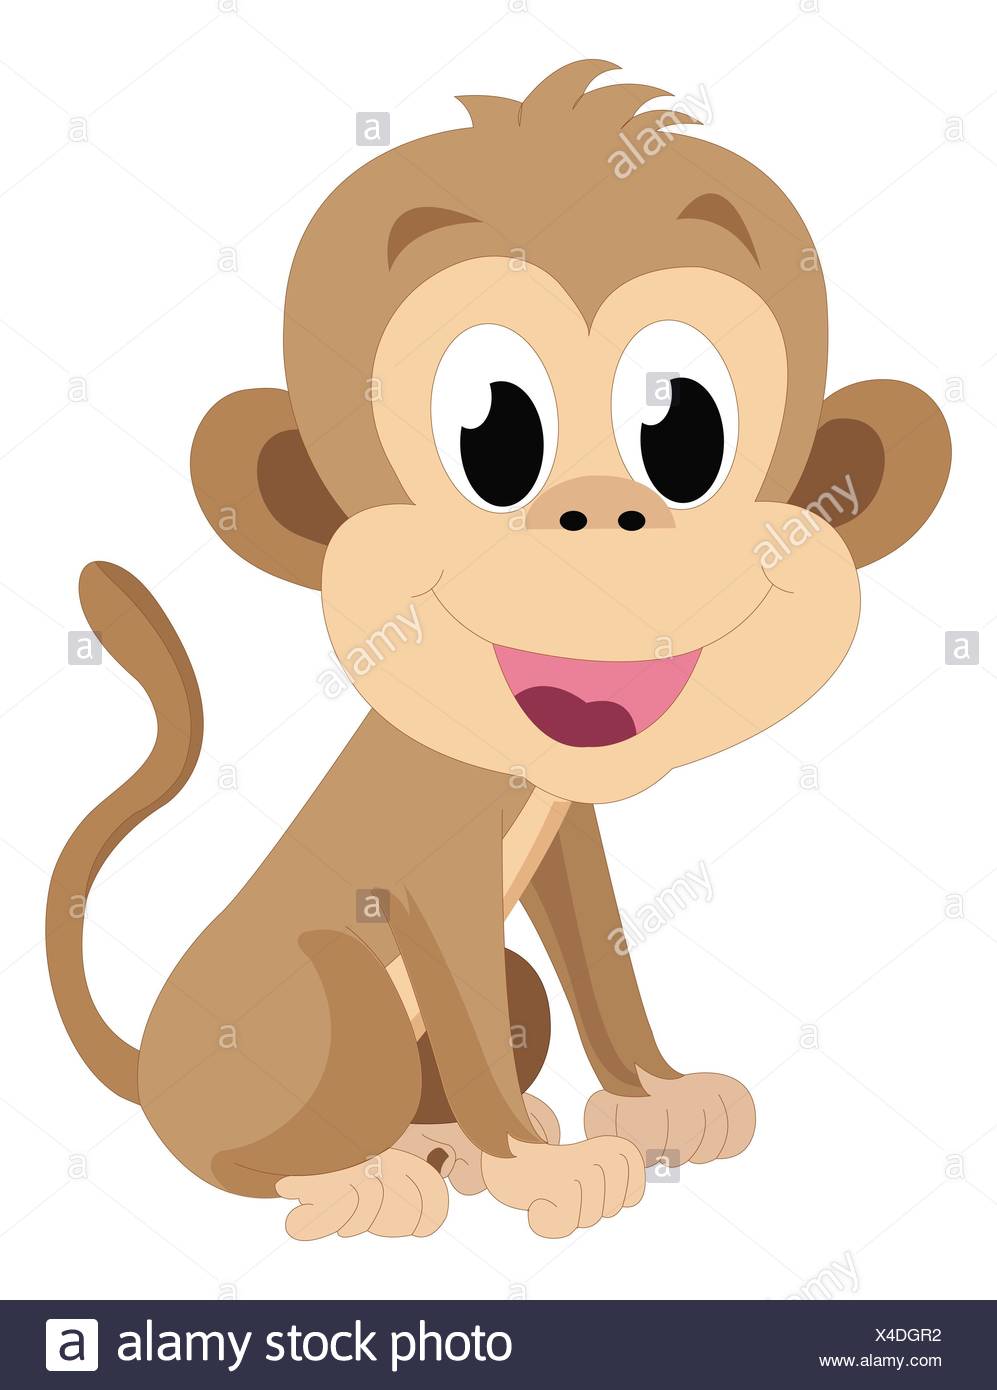 Baby Monkey Brown Smiling Vector Illustration Stock Photo Alamy